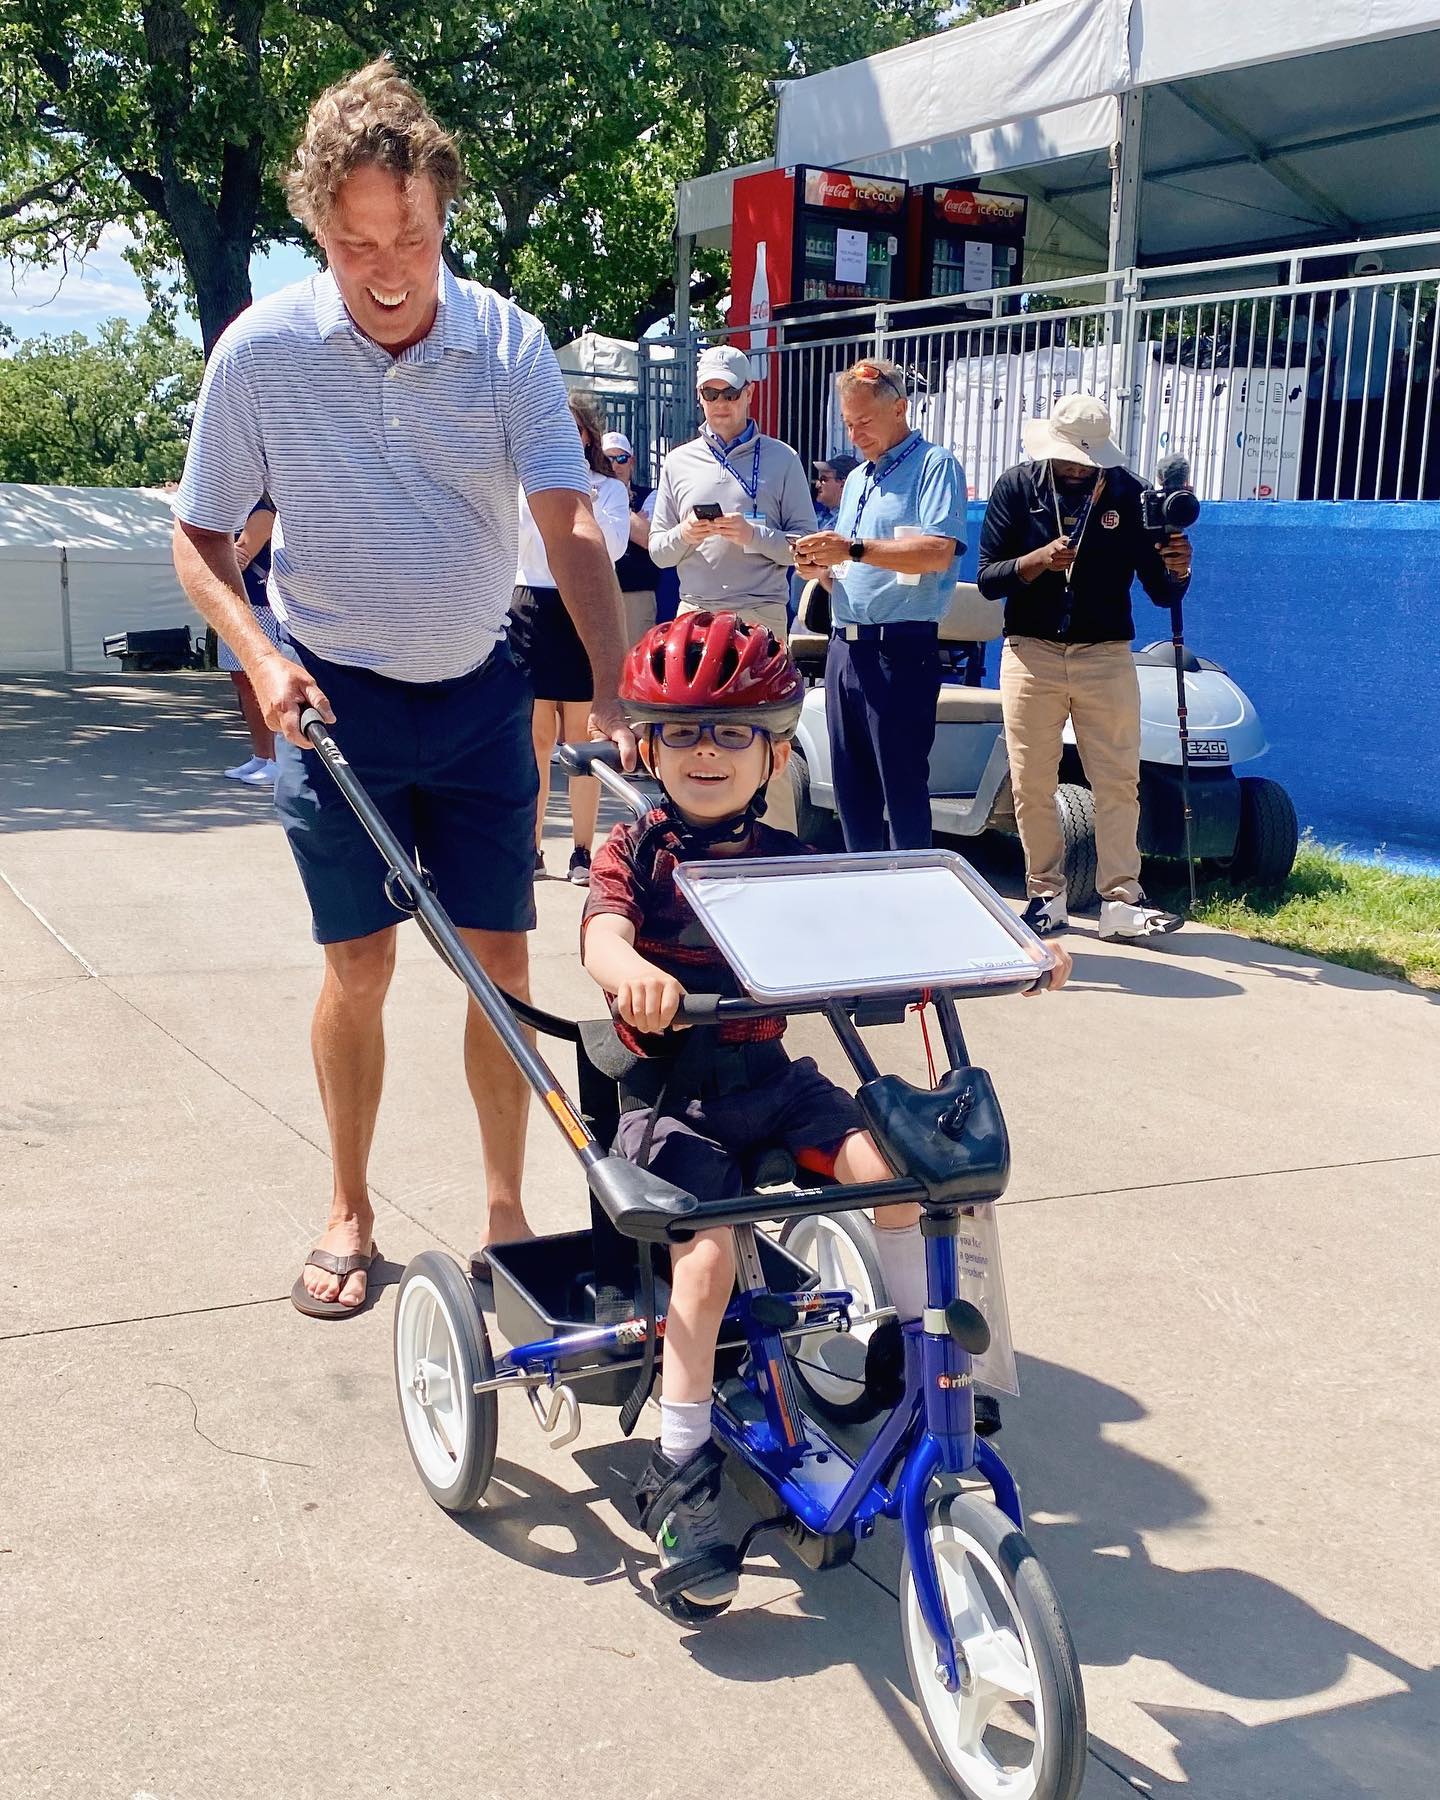 Damien received his specialized bike today at the Principal Charity Classic! This bike was sponsored and presented by last year's Principal Charity Classic winner Stephen Ames! 